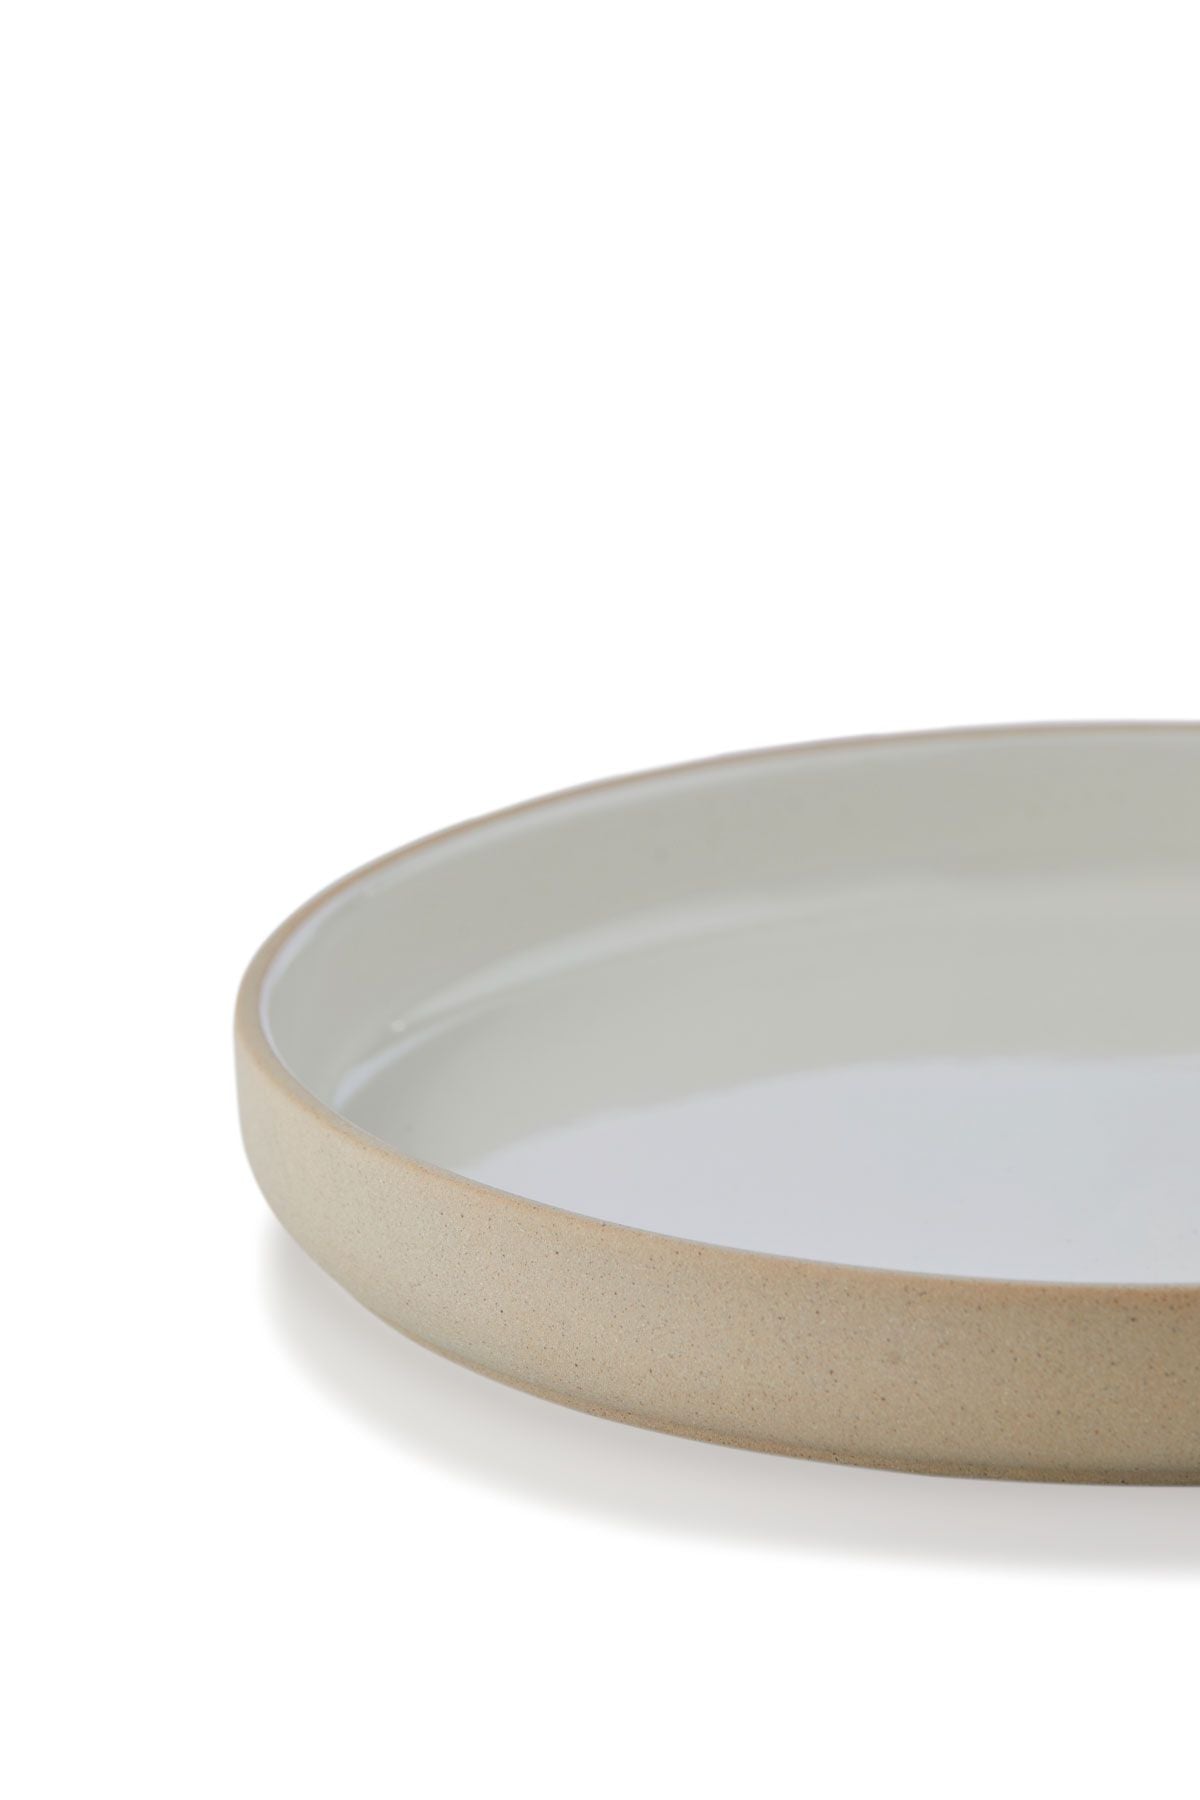 Studio About Clayware Serving Dish, Sand/Light Grey